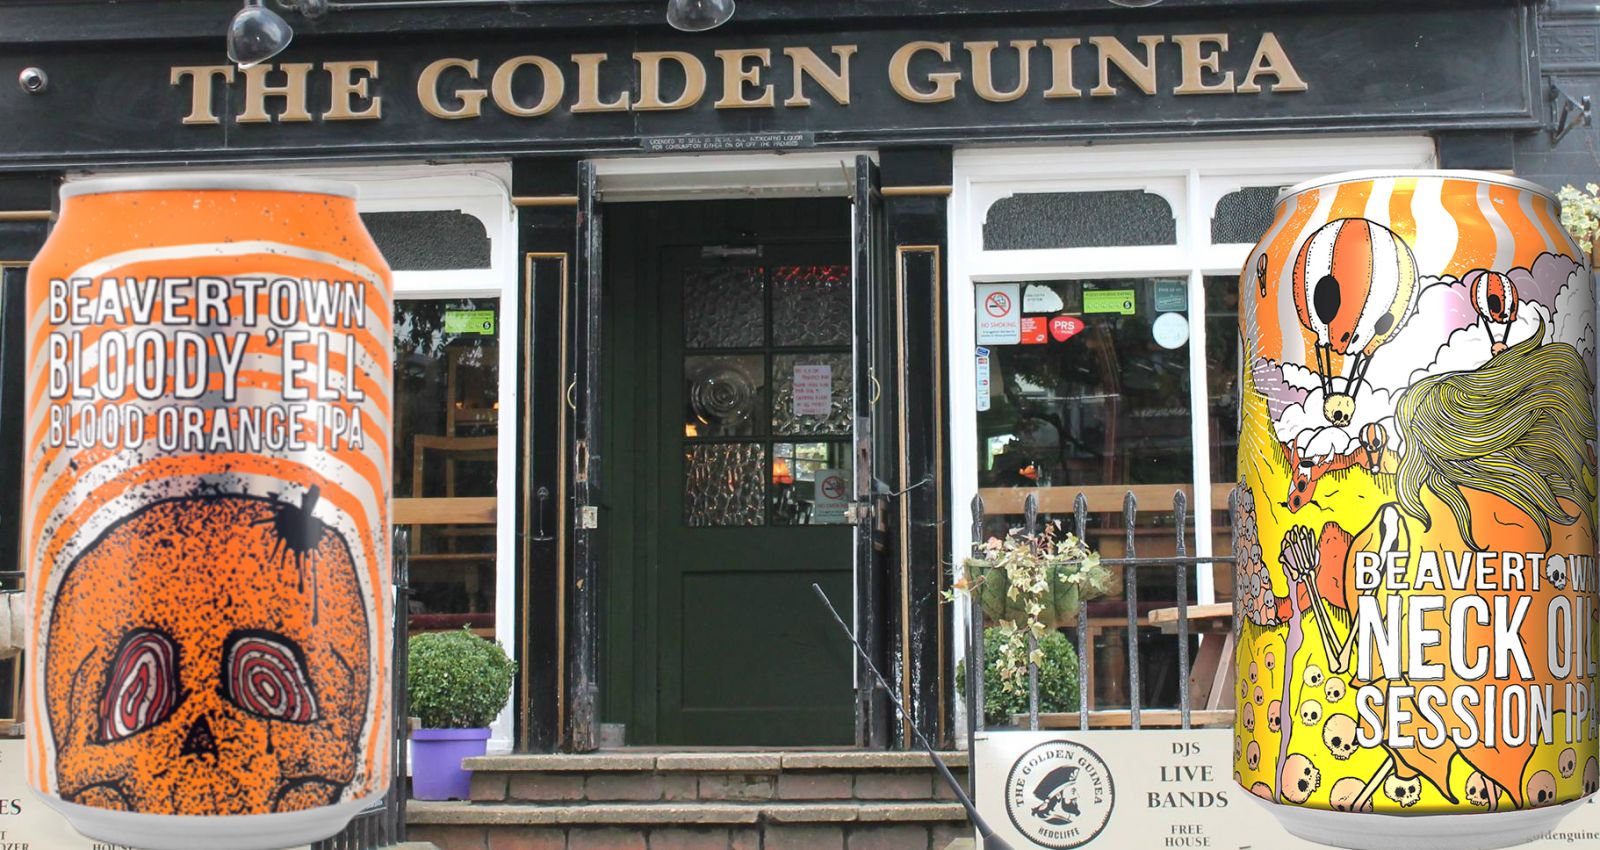 The Golden Guinea will be offering some amazing beers!